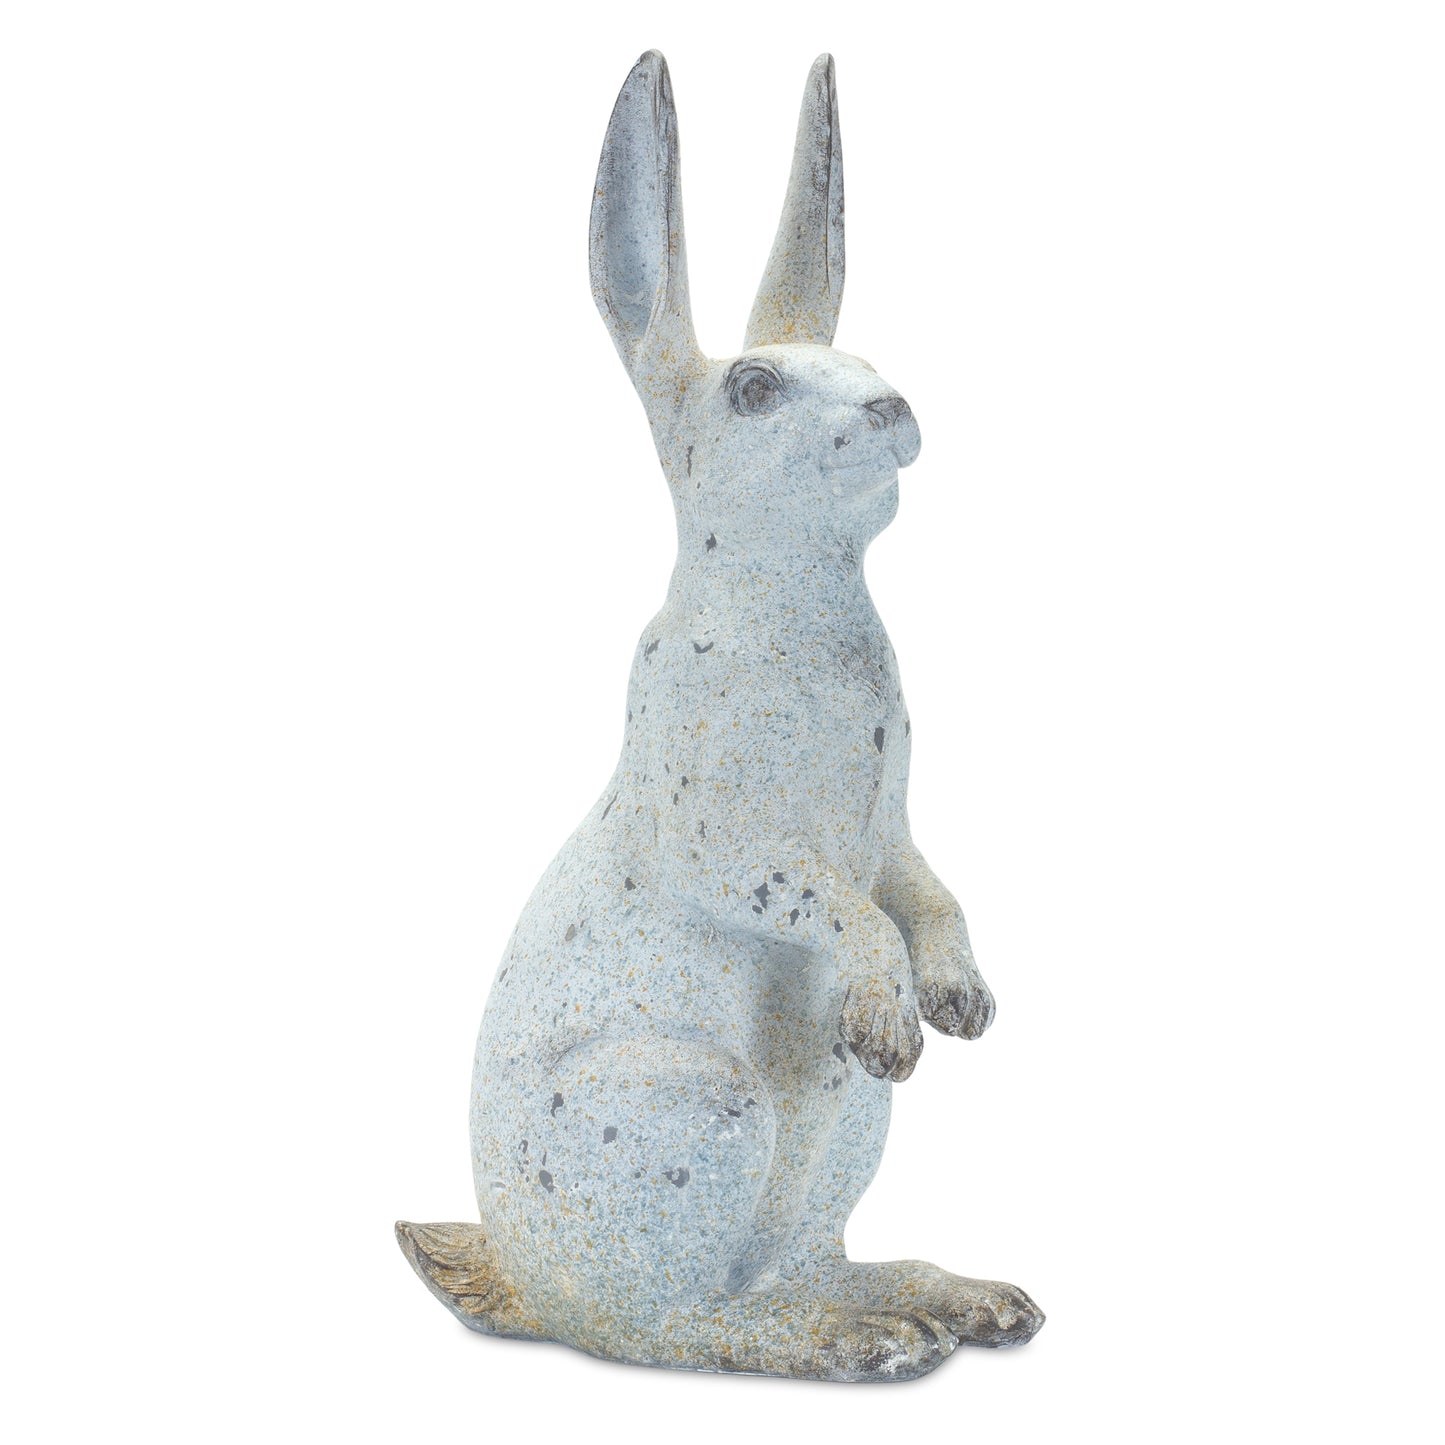 Weathered Stone Rabbit Statue with Distressed Finish 17"H